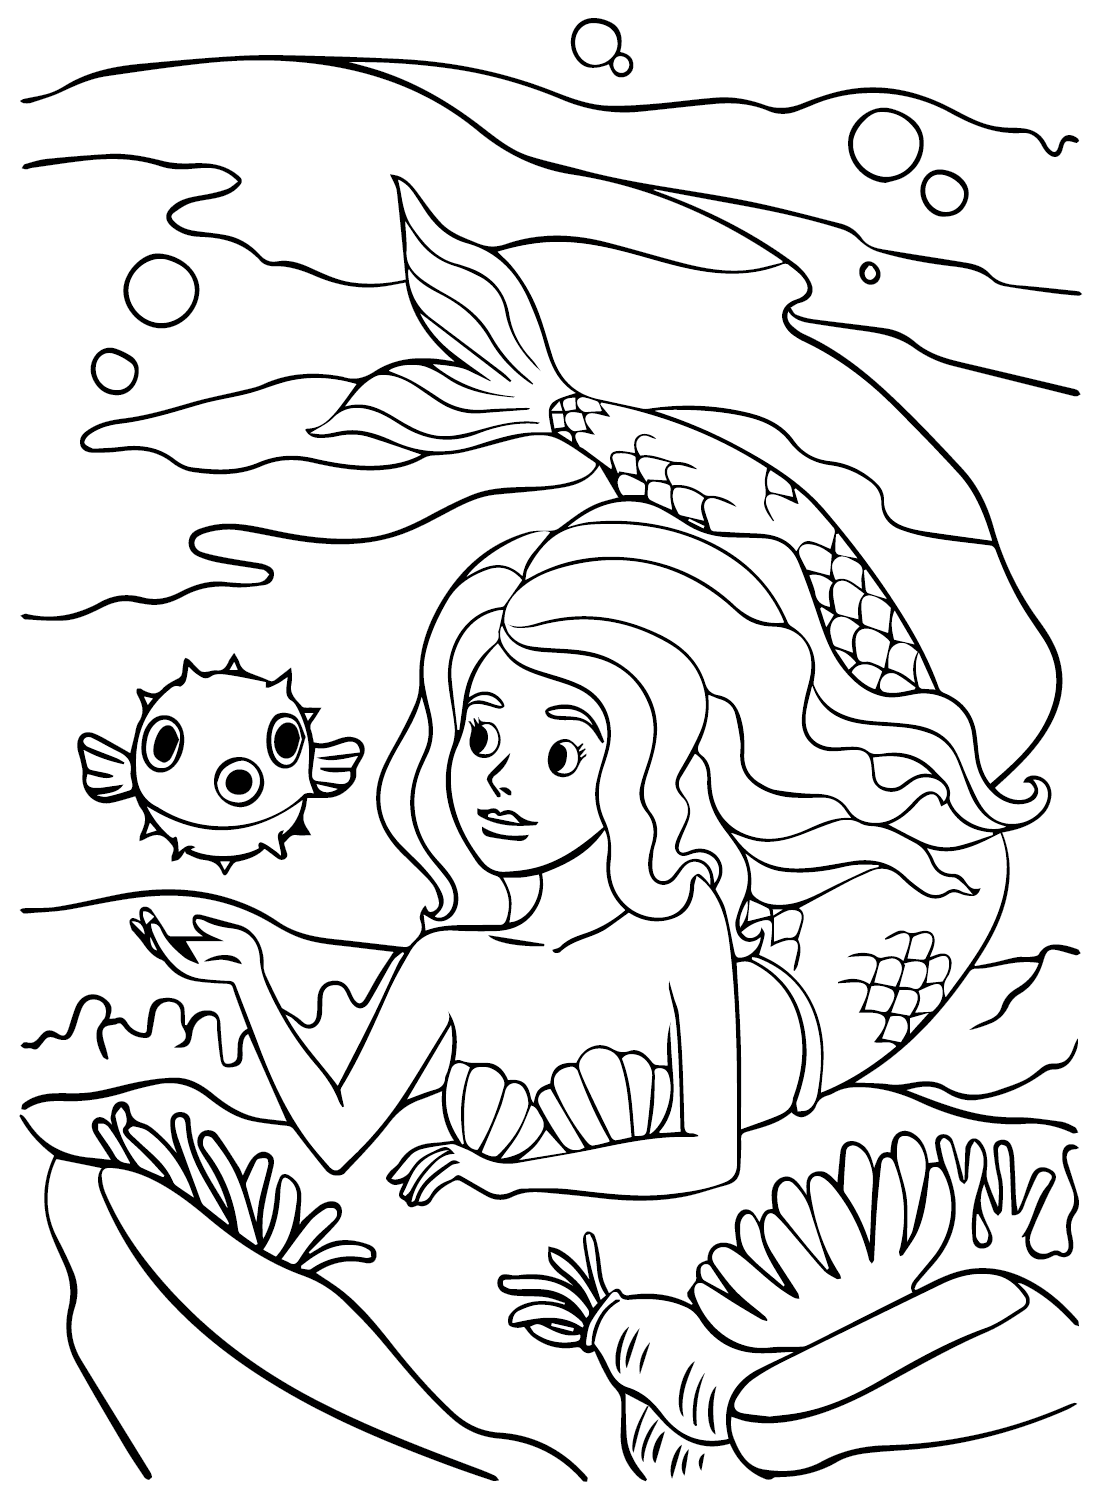 Mermaid with Puffer Coloring Page - Free Printable Coloring Pages